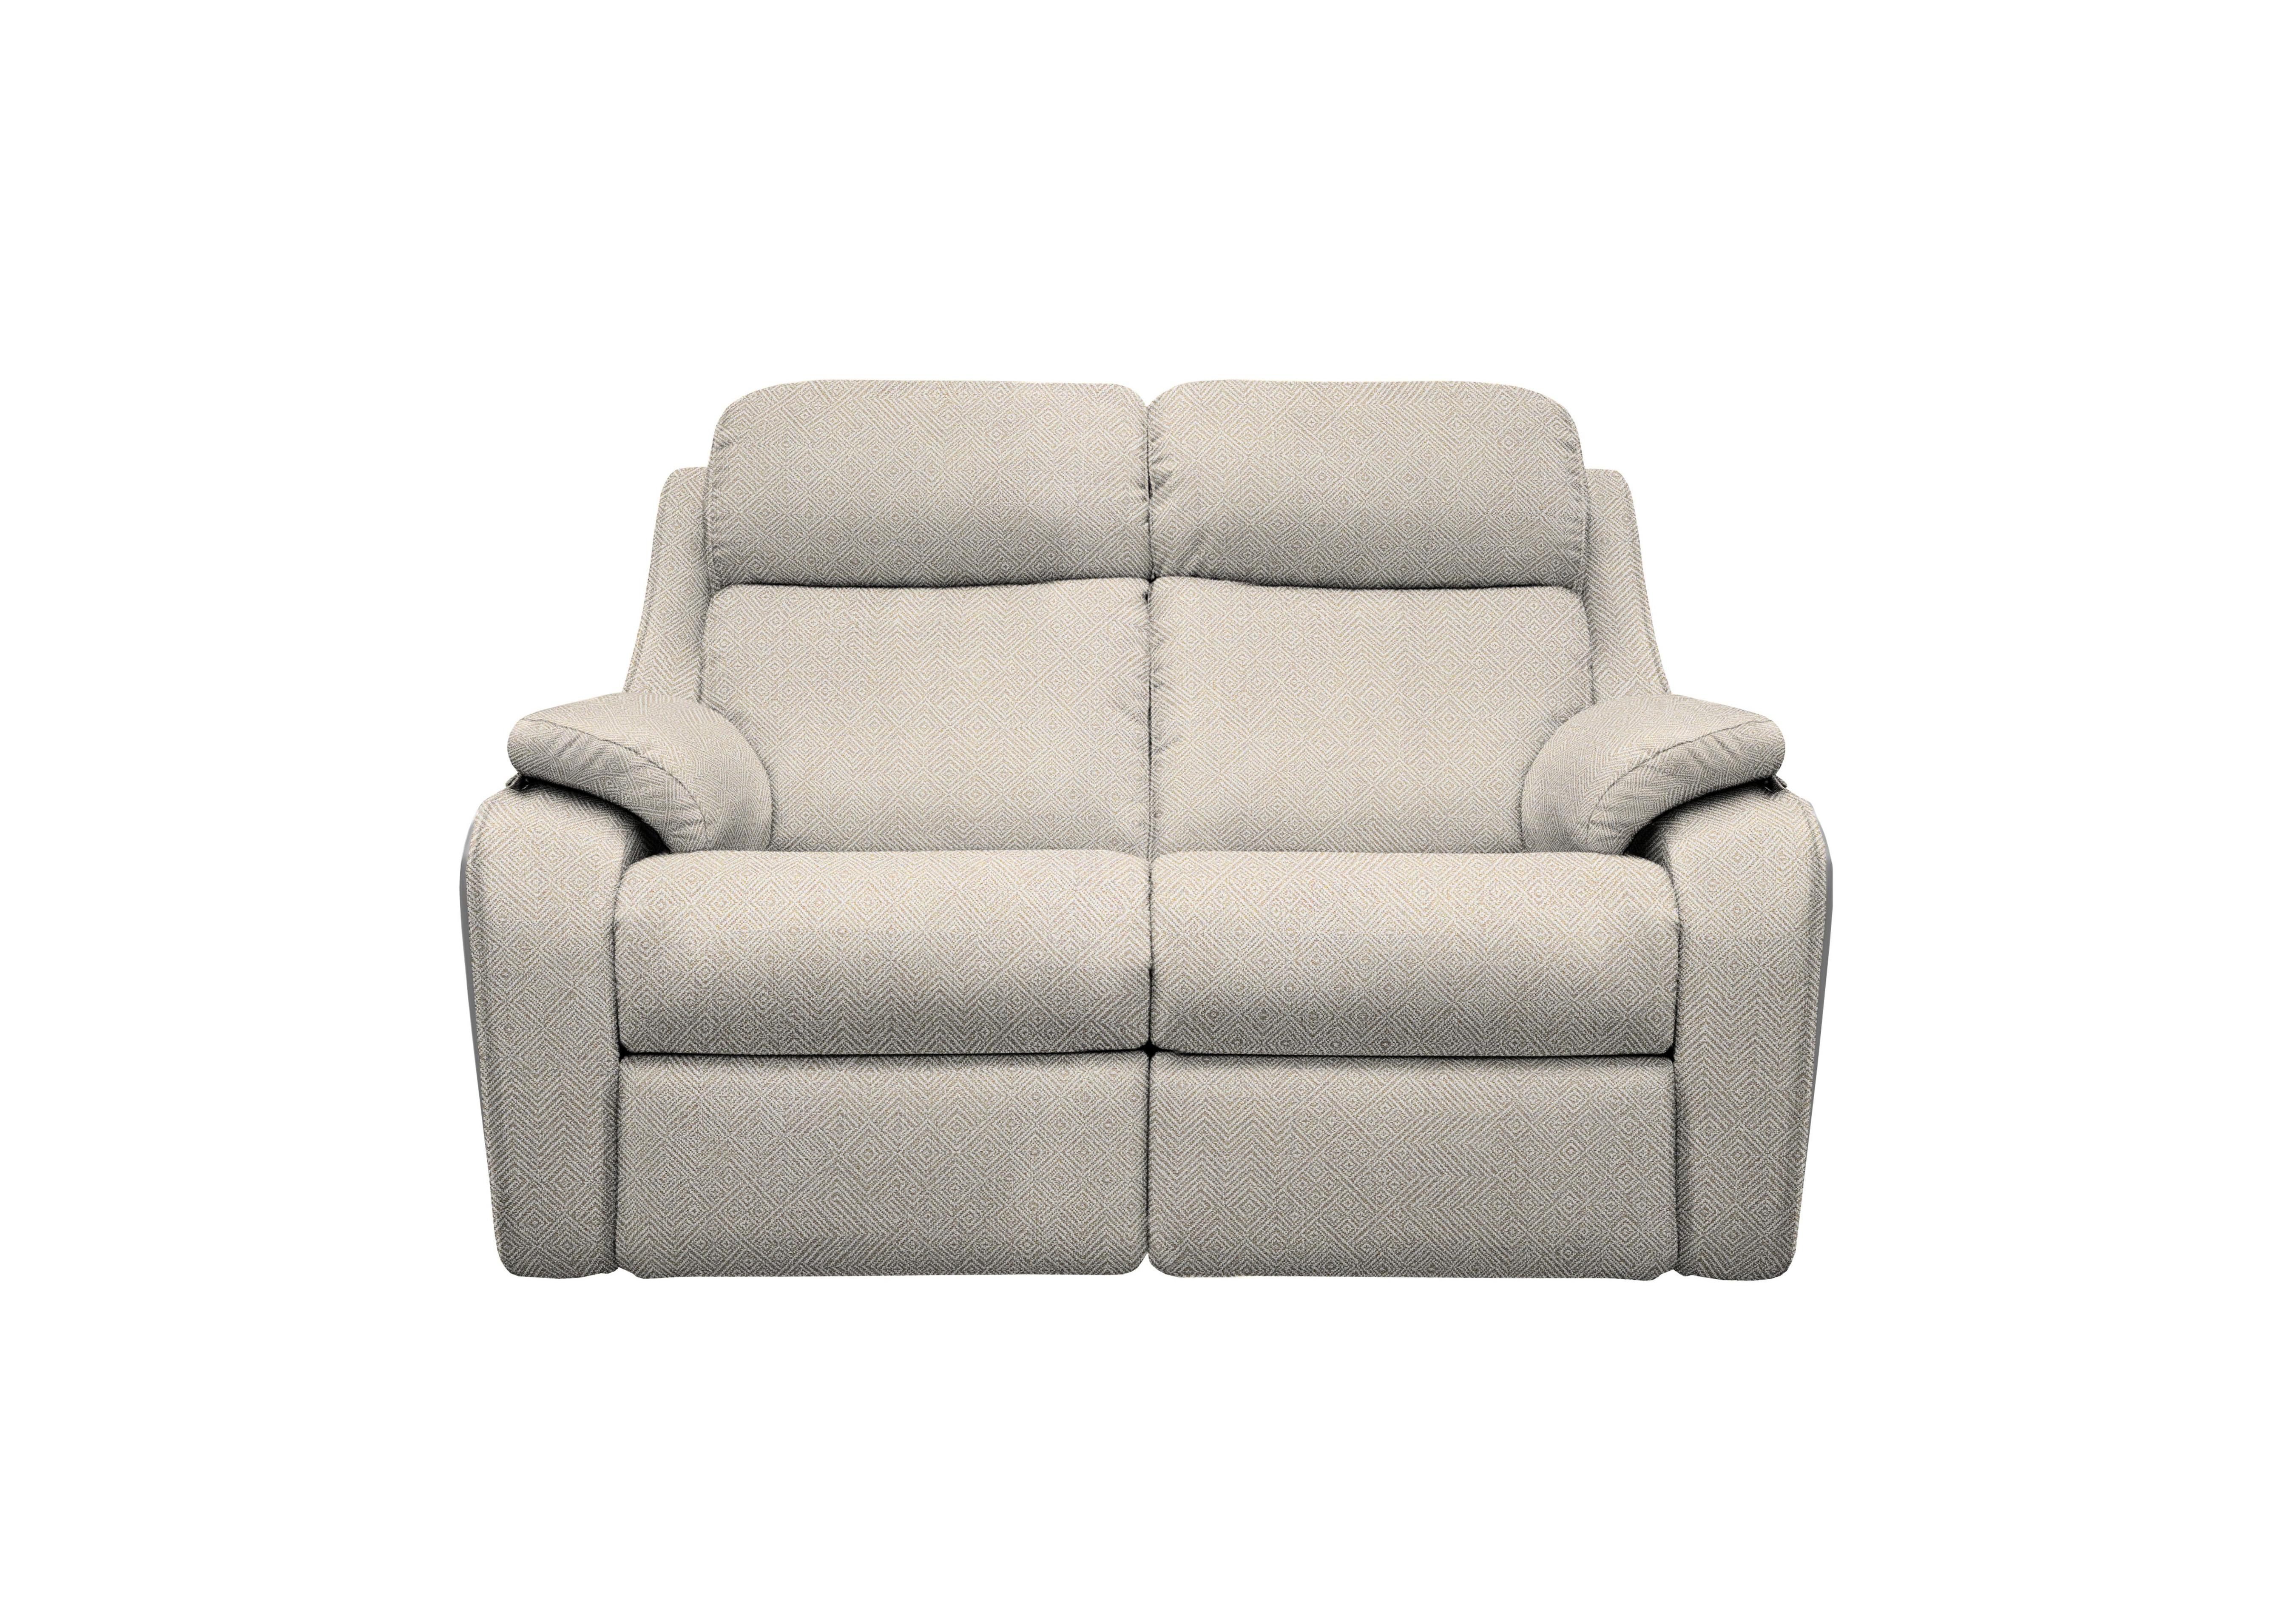 Kingsbury 2 Seater Fabric Power Recliner Sofa with Power Headrests in B011 Nebular Blush on Furniture Village